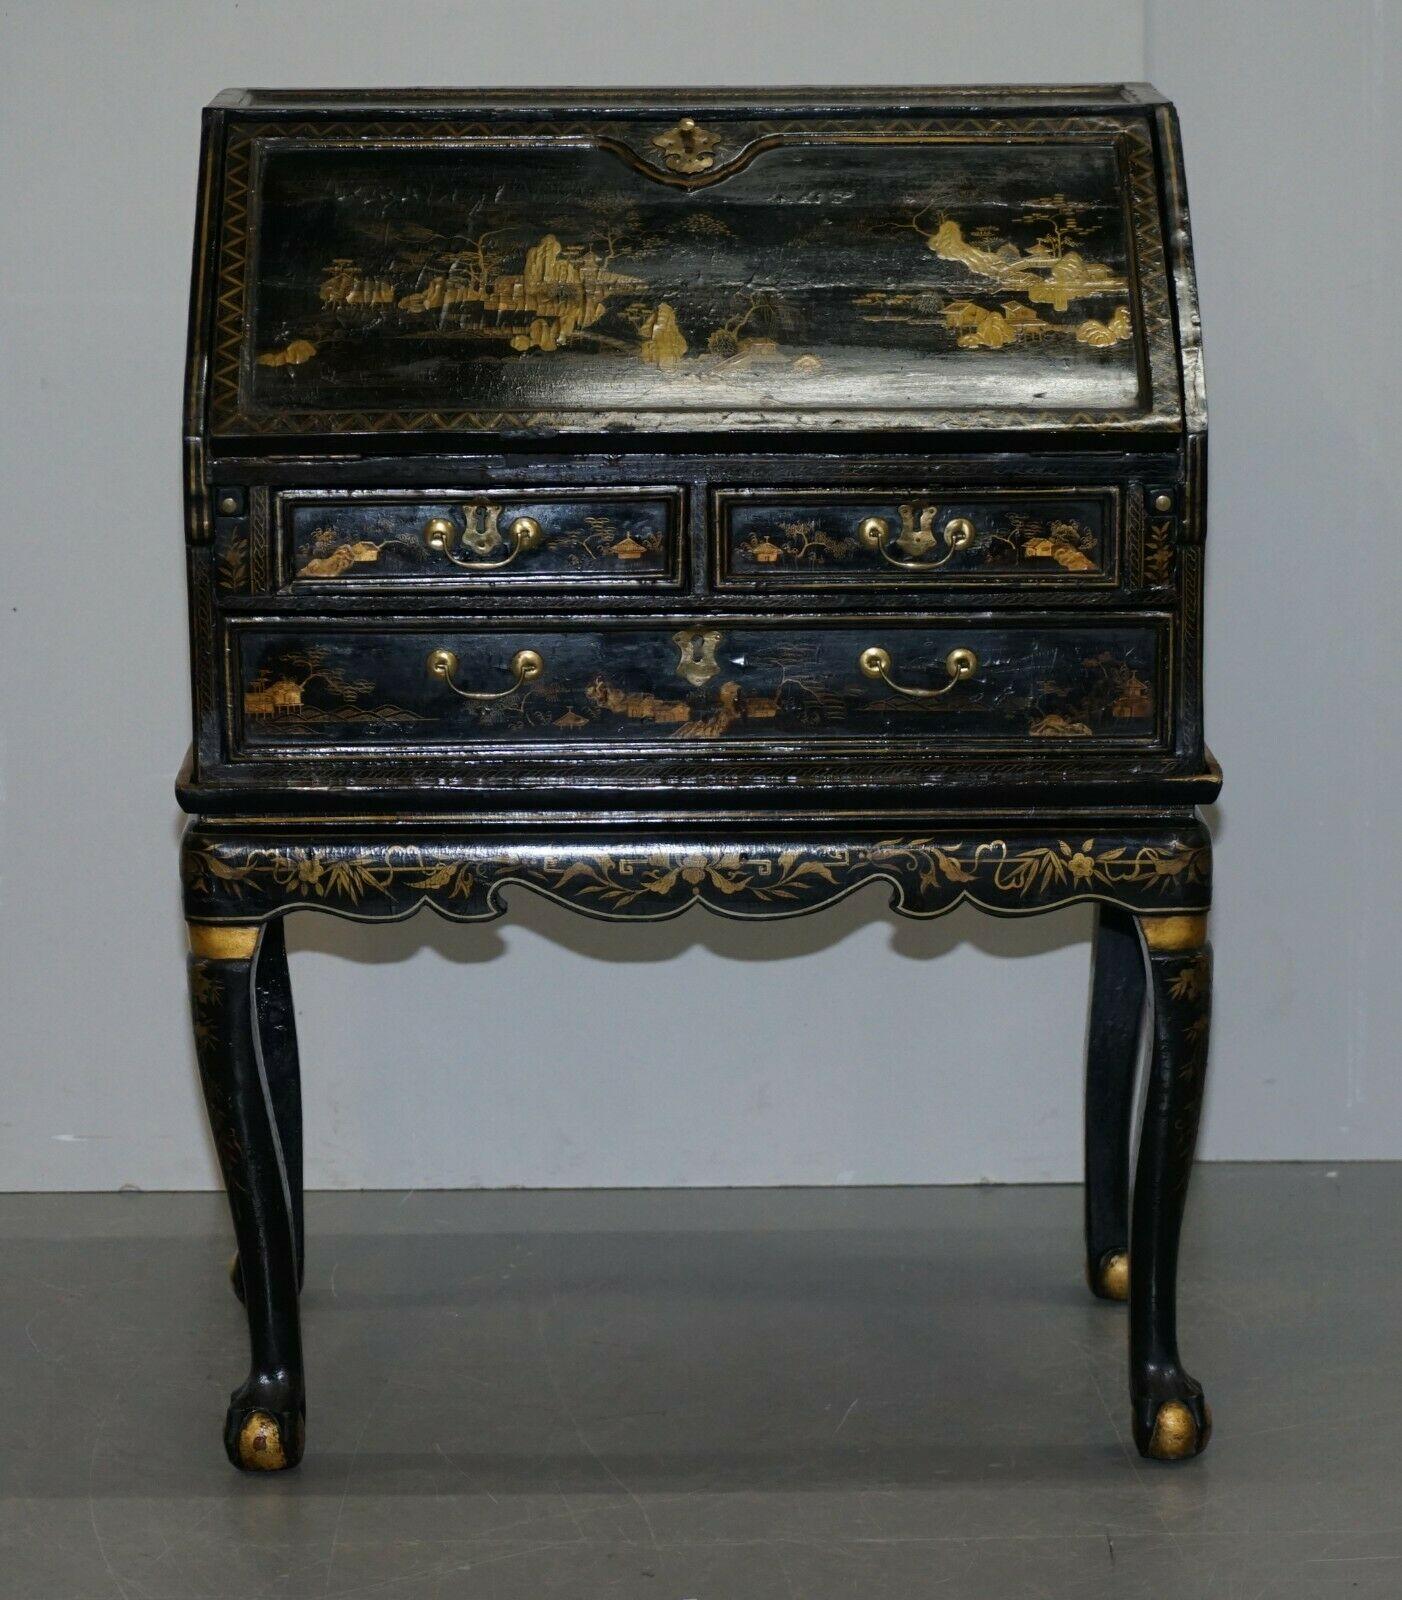 We are delighted to offer for sale this sublime Queen Anne English made Japanned writing bureau with elegant claw and ball legs

A very good looking well made and decorative piece, the craftsmanship is absolutely sublime throughout, this is a late